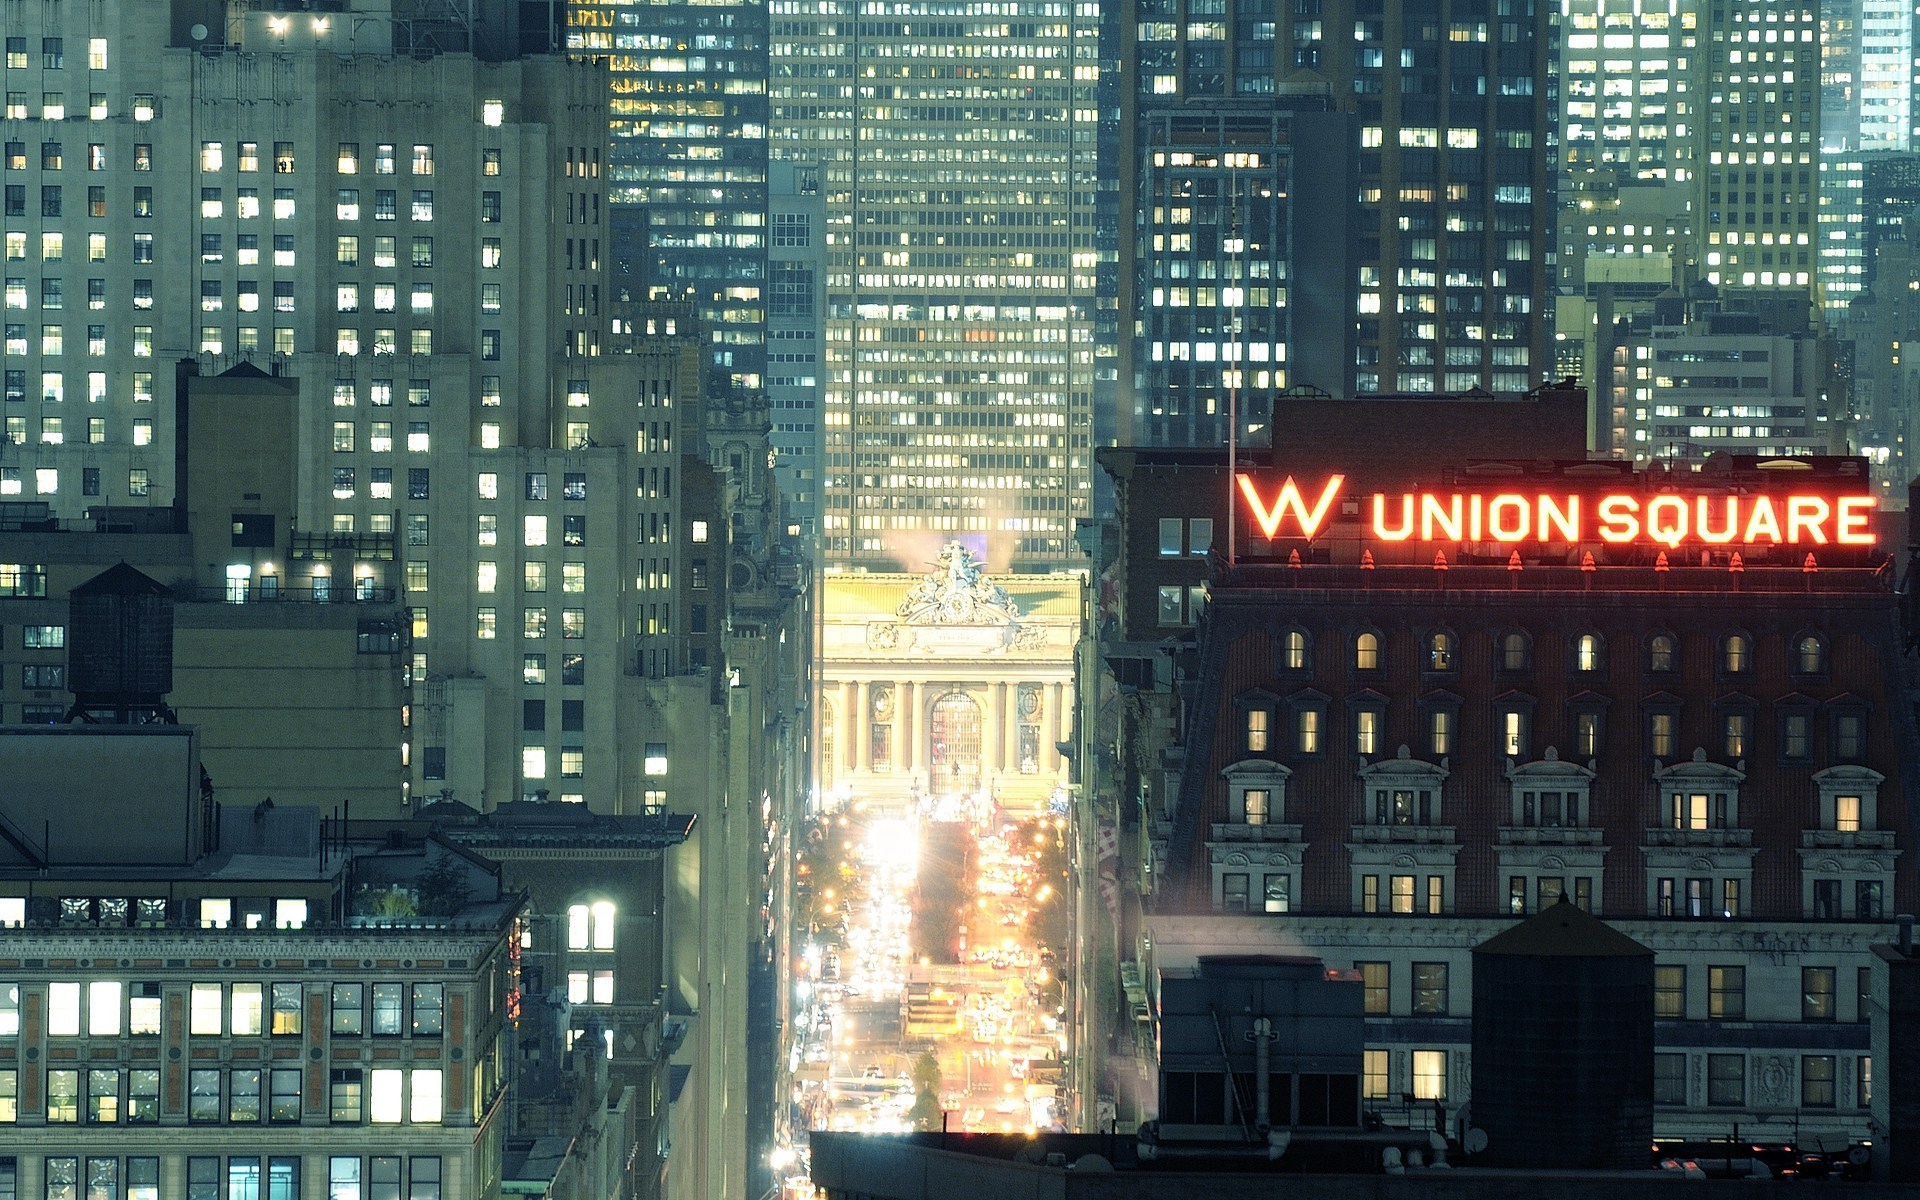 Grand Central Station Background Blurred Photo By Harun Mri Picture Of Grand  Central Station Background Background Image And Wallpaper for Free Download